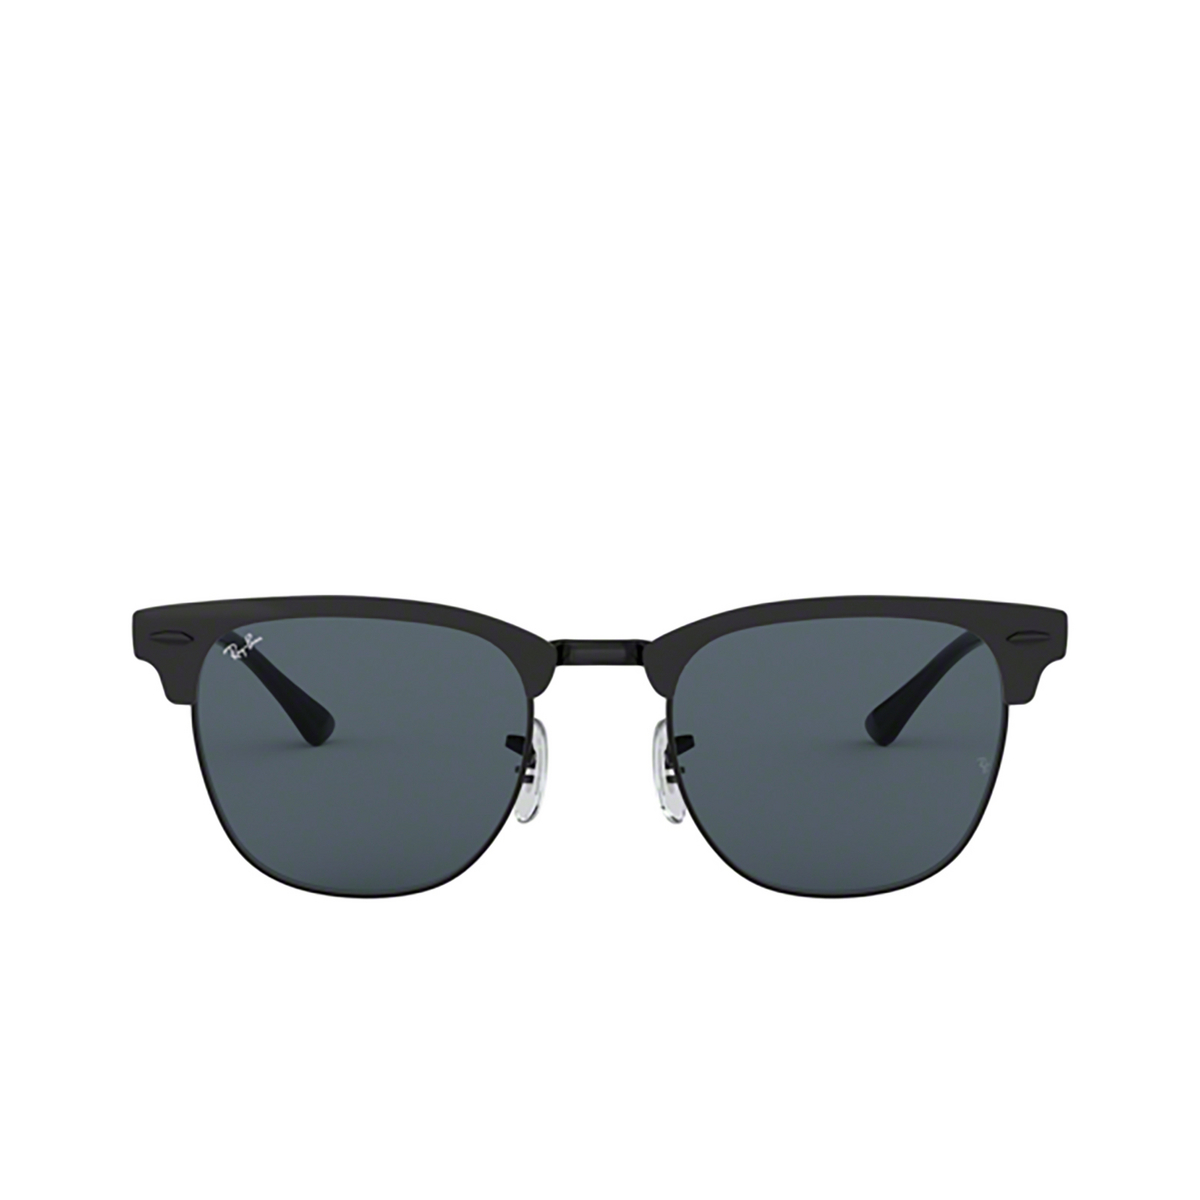 Ray-Ban CLUBMASTER METAL Sunglasses 186/R5 MATTE BLACK ON BLACK - front view